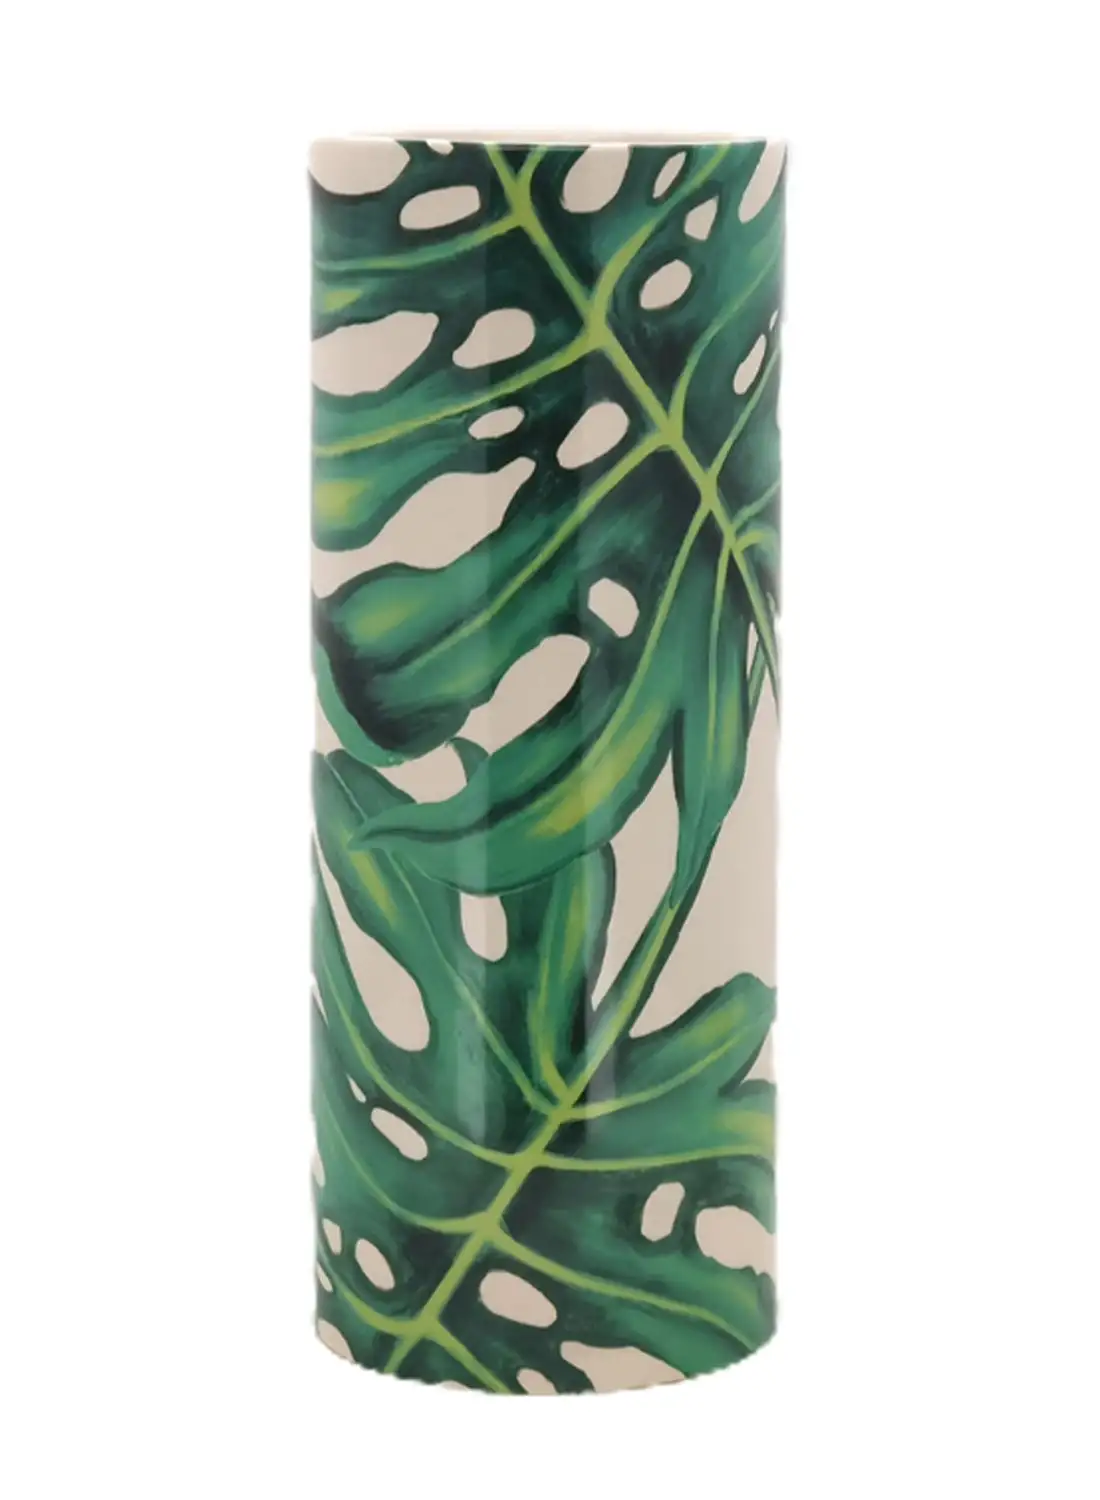 Switch Beautiful Designs Ceramic Vase Unique Luxury Quality Material For The Perfect Stylish Home N13-003 White/Green